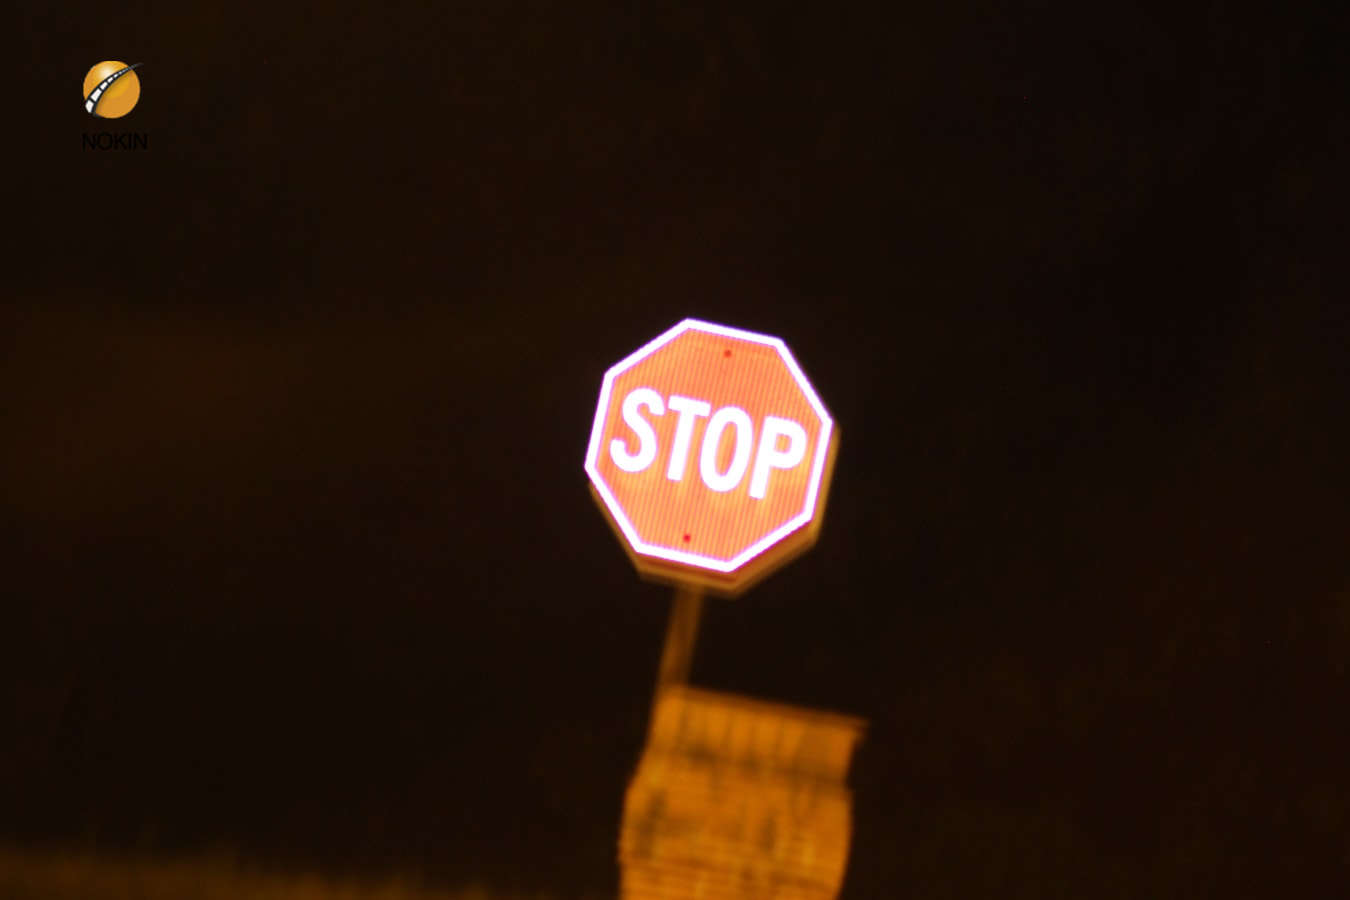 20ml headspace vialOctagonal solar flashing led stop sign for sale